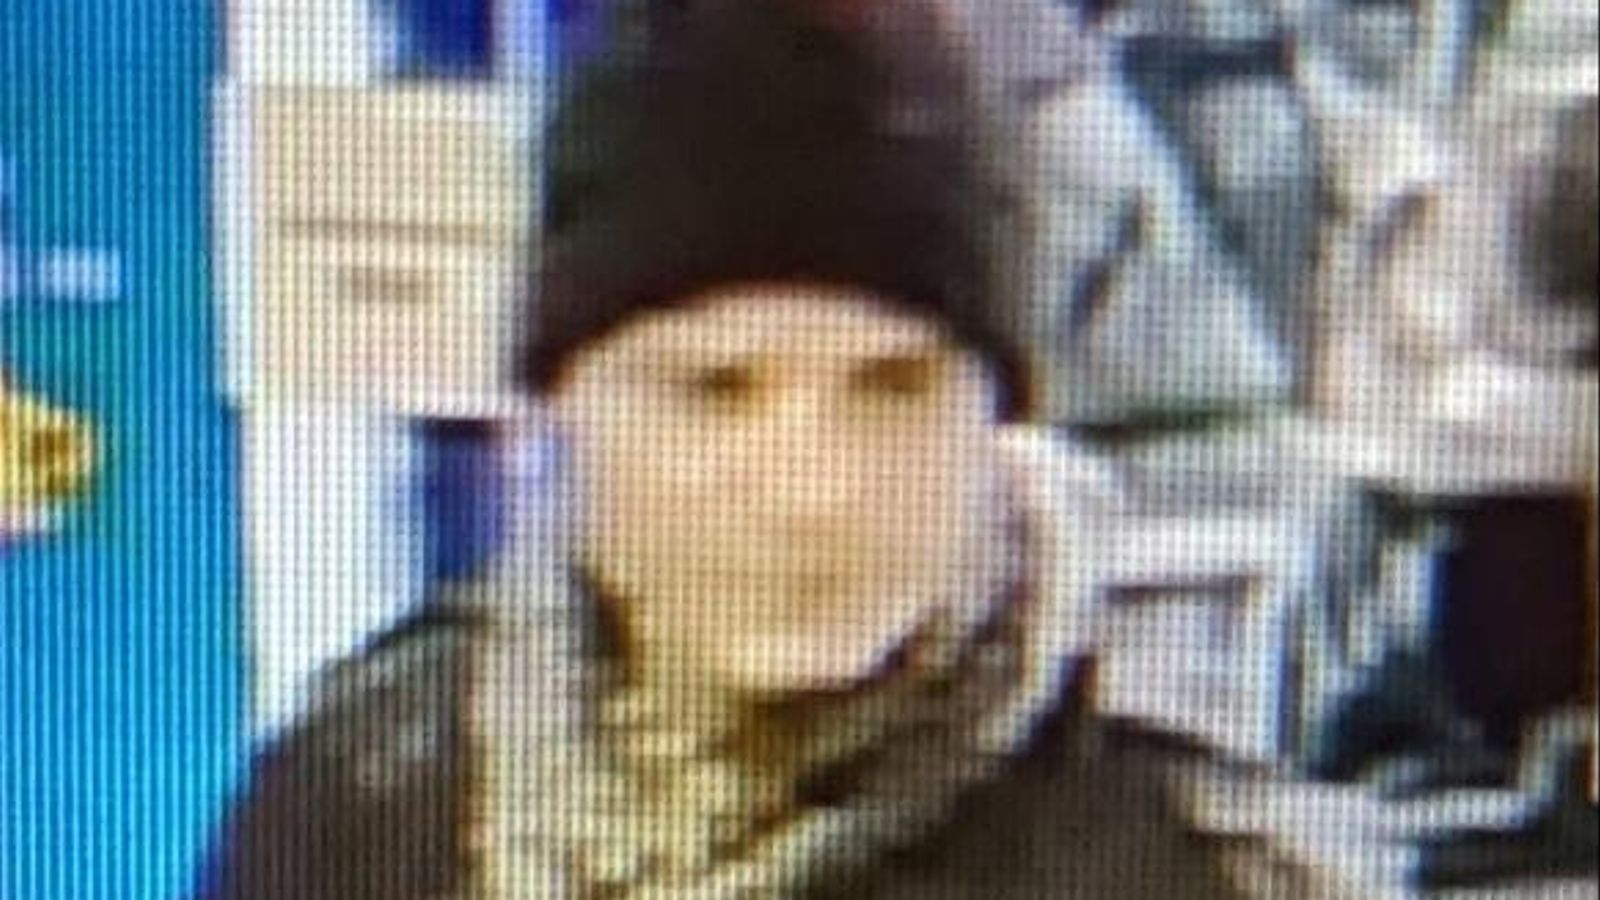 cctv-image-of-man-who-stole-60-from-four-year-old-at-ipswich-toy-shop